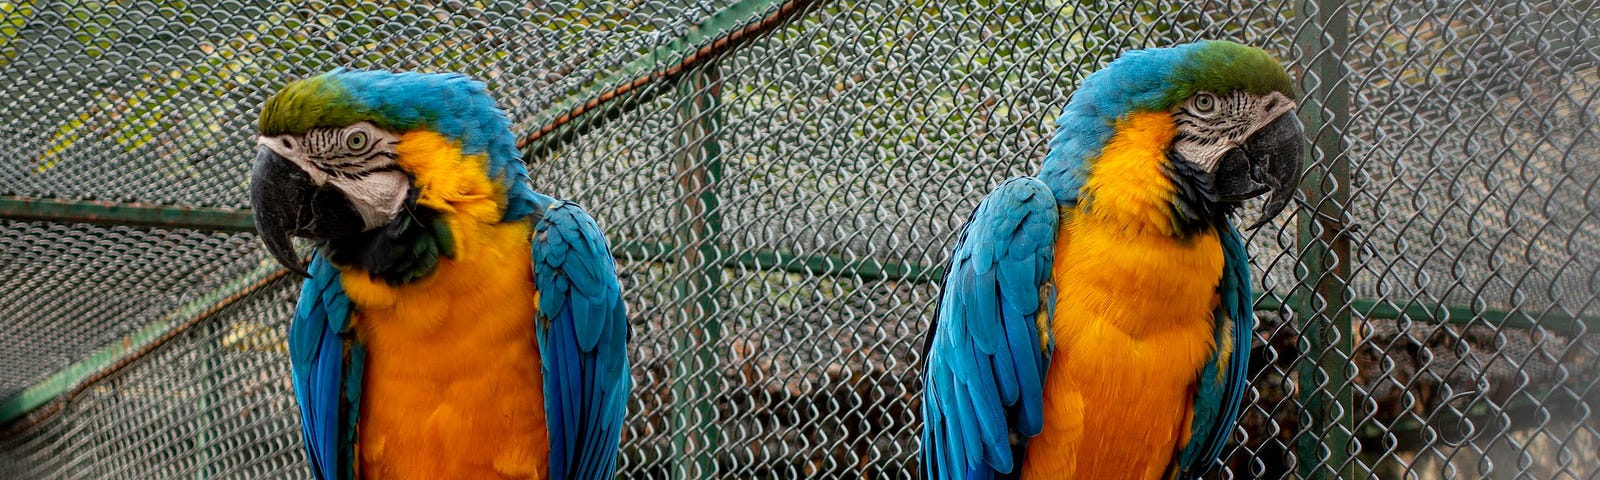 2 brightly coloured parrots sitting on a wooden perch are next to each other, but facing in opposite directions, as if they might be disagreeing. They are outside, but in a large cage.